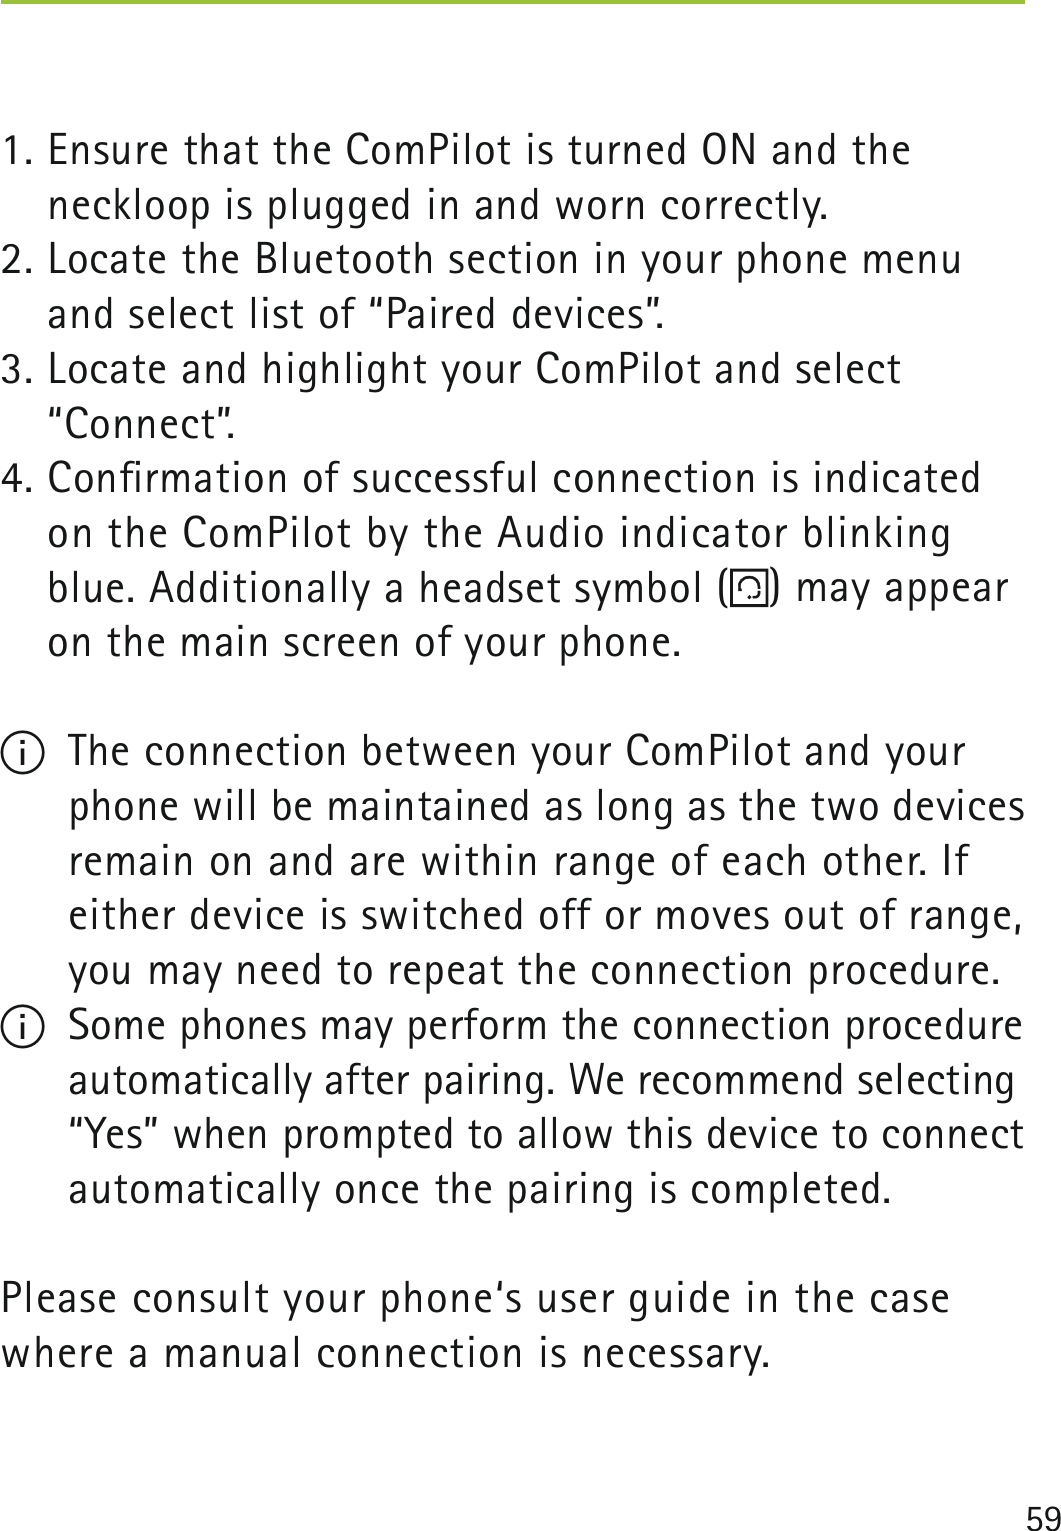 591. Ensure that the ComPilot is turned ON and the neckloop is plugged in and worn correctly.2. Locate the Bluetooth section in your phone menu and select list of “Paired devices”.3. Locate and highlight your ComPilot and select  “Connect”.4. Conﬁrmation of successful connection is indicated on the ComPilot by the Audio indicator blinking blue. Additionally a headset symbol ( ) may appear on the main screen of your phone. I  The connection between your ComPilot and your phone will be maintained as long as the two devices remain on and are within range of each other. If either device is switched off or moves out of range, you may need to repeat the connection procedure.I  Some phones may perform the connection procedure automatically after pairing. We recommend selecting “Yes” when prompted to allow this device to connect automatically once the pairing is completed.Please consult your phone‘s user guide in the case where a manual connection is necessary. 